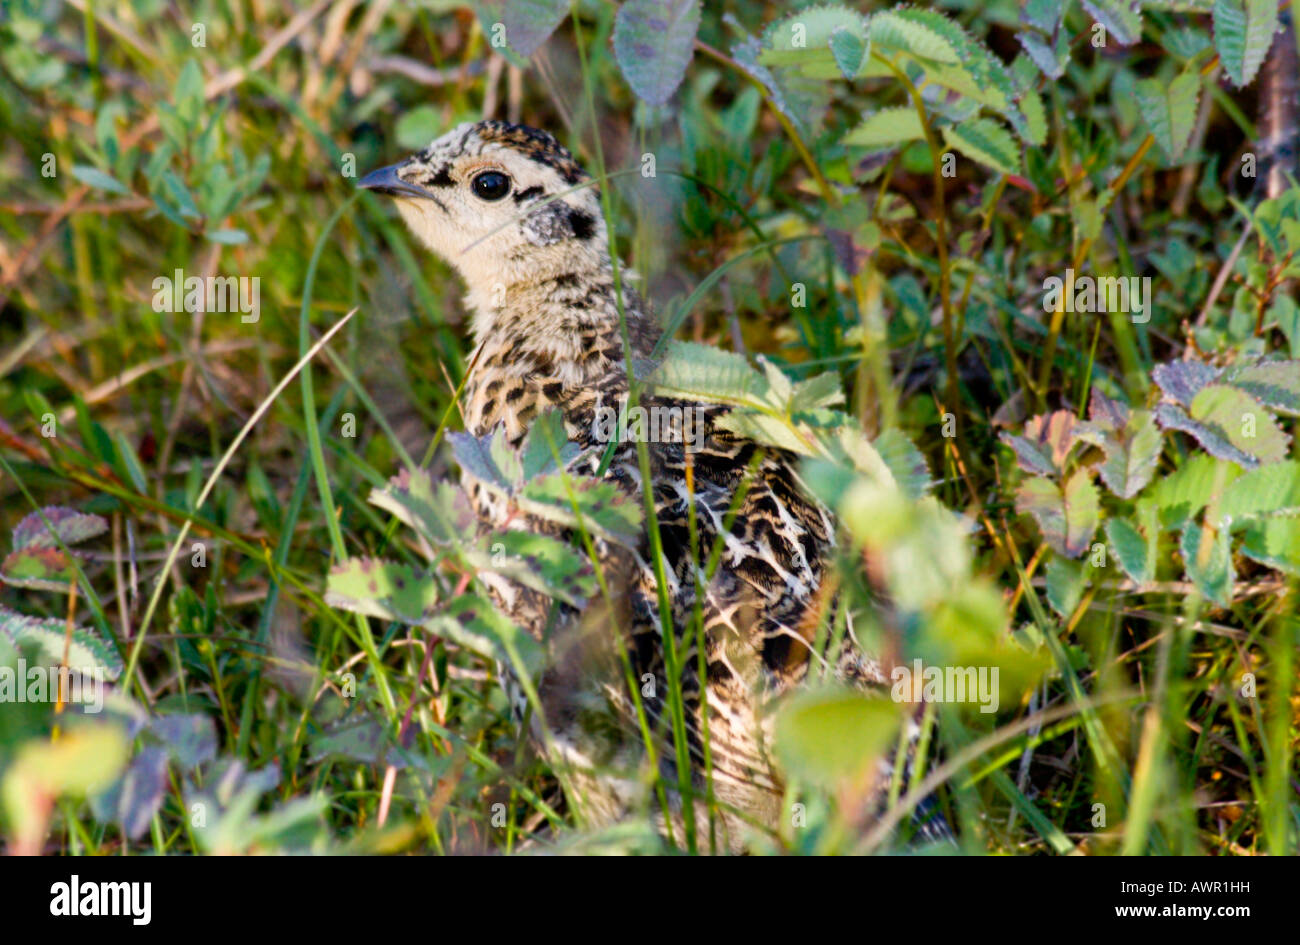 Willow Grouse or Willow Ptarmigan (Lagopus lagopus) chick hiding in the grass in Yukon Territory, Canada Stock Photo